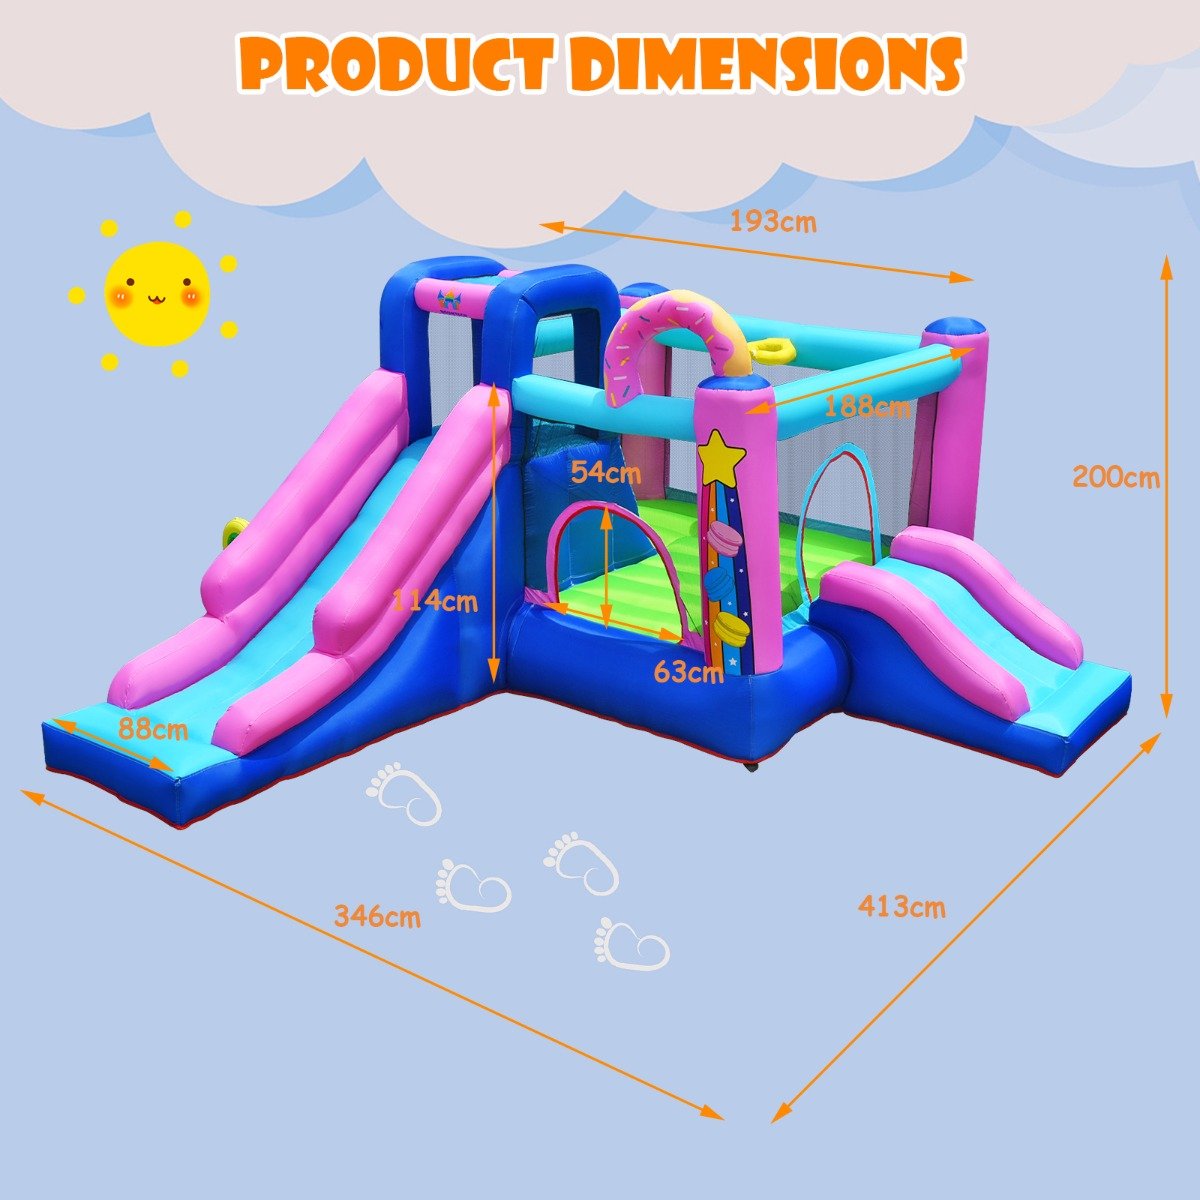 Kid's Dreamland: Inflatable Bounce House featuring 2 Slides for Outdoor Joy